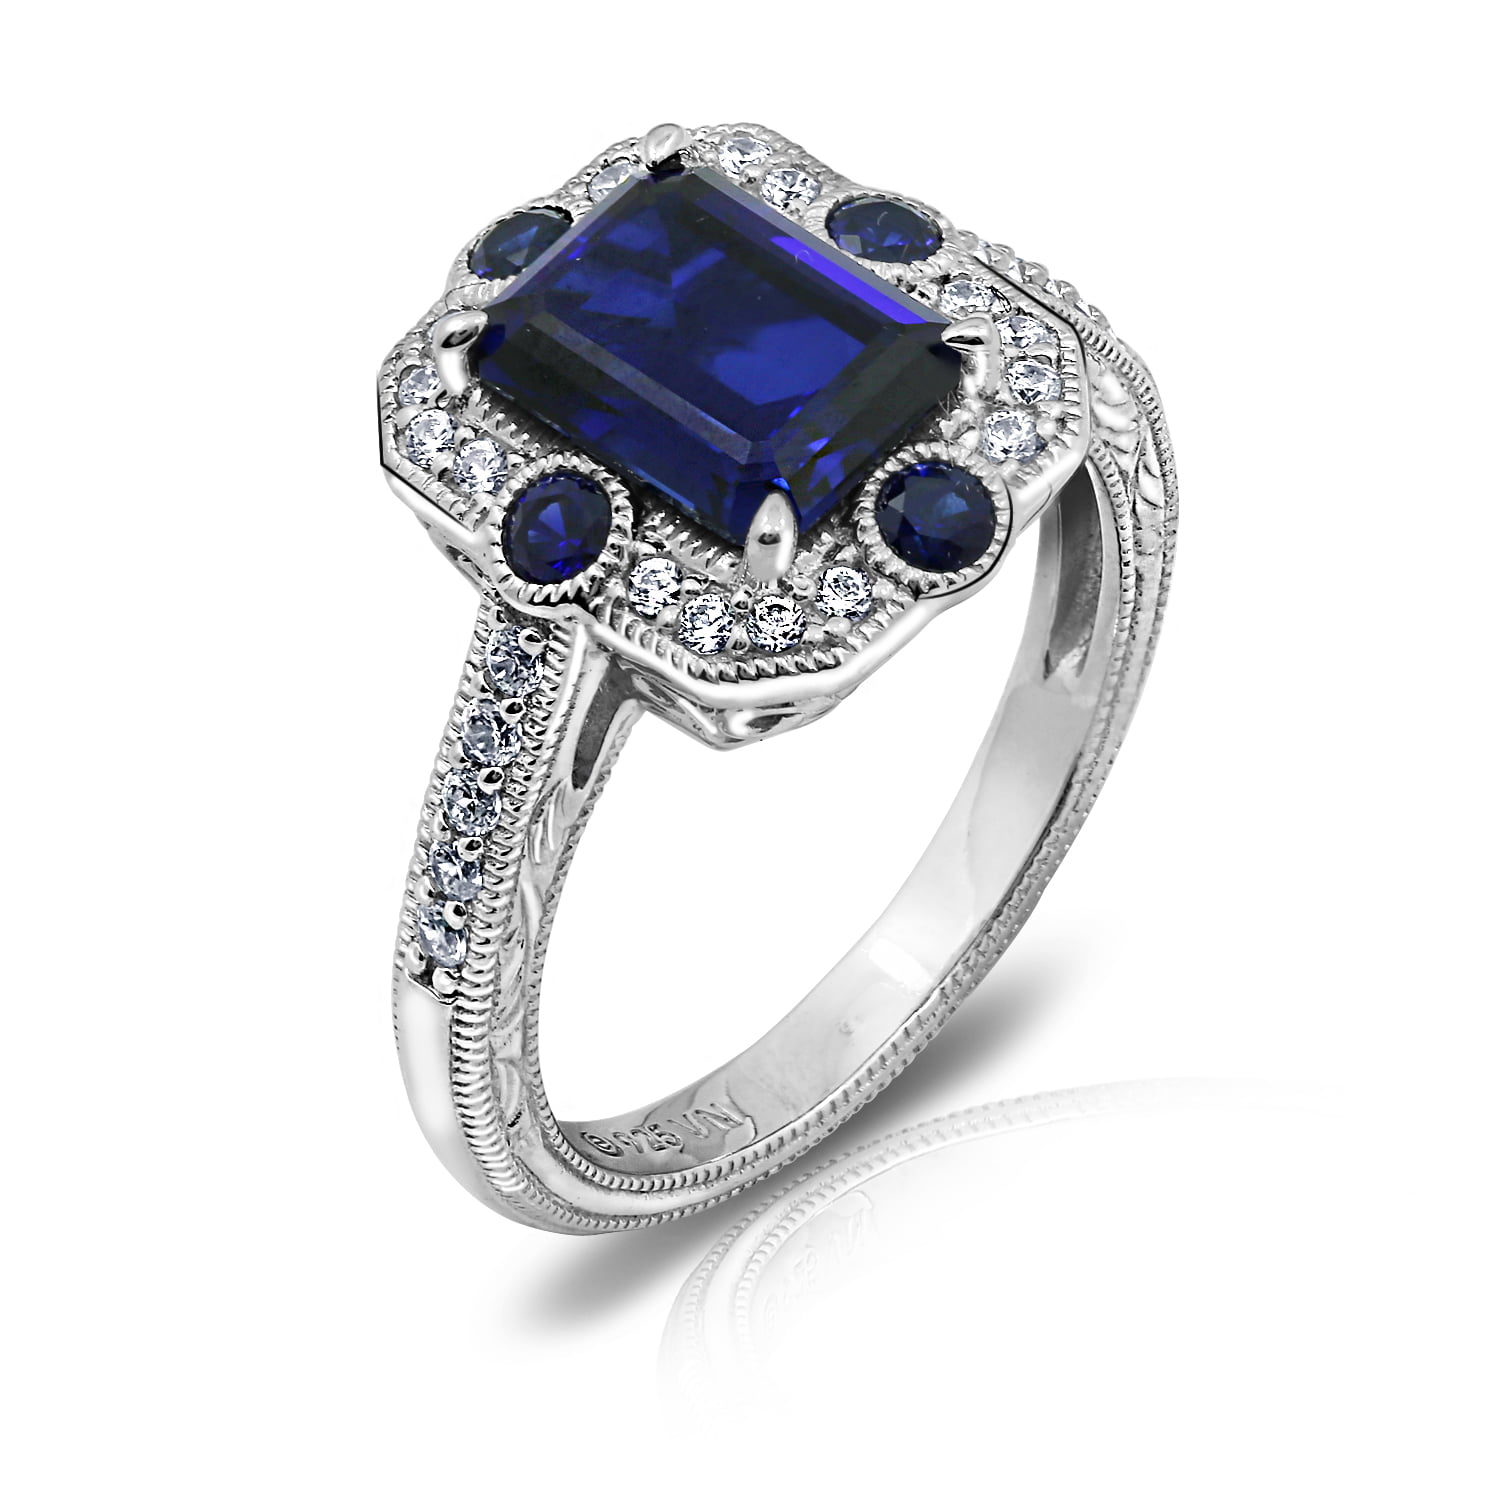 Details about   925 Sterling Silver Sapphire Blue & Clear Cubic Zircon Band Ring Size 7 & 8 